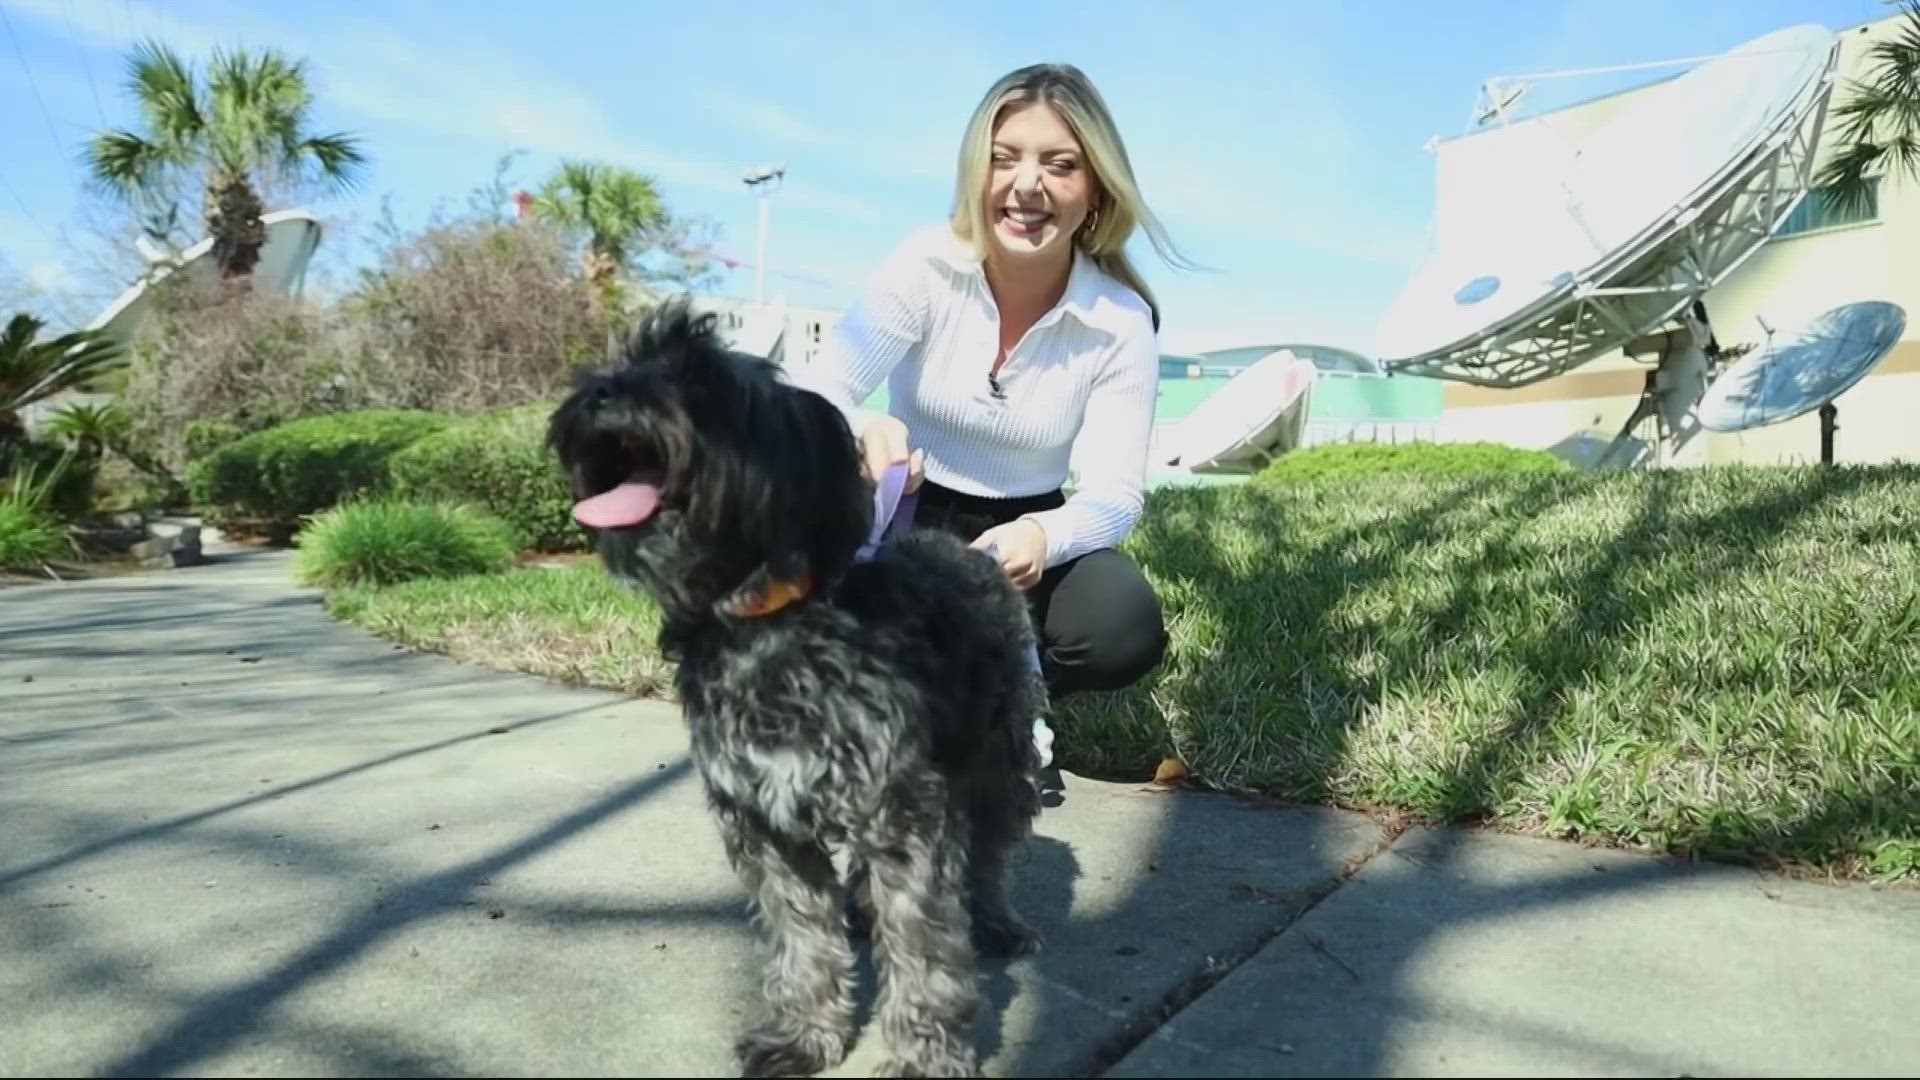 It's called Black Dog Syndrome and experts say it's a myth.